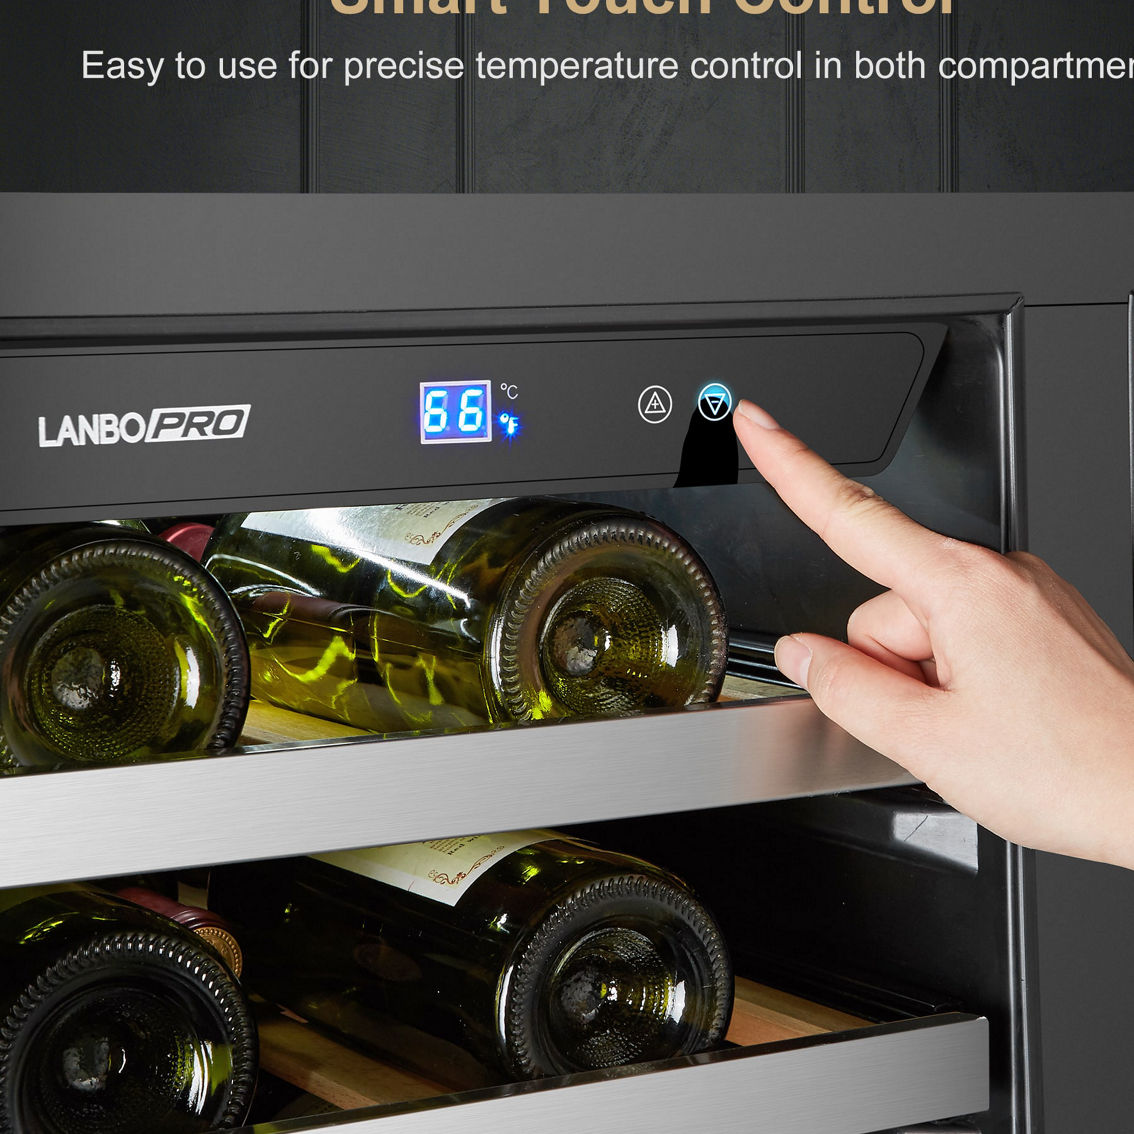 Lanbo Wine and Beverage Cooler Seemless Stainless Steel Trimmed, 26 Bottle 76 Can - Image 3 of 5